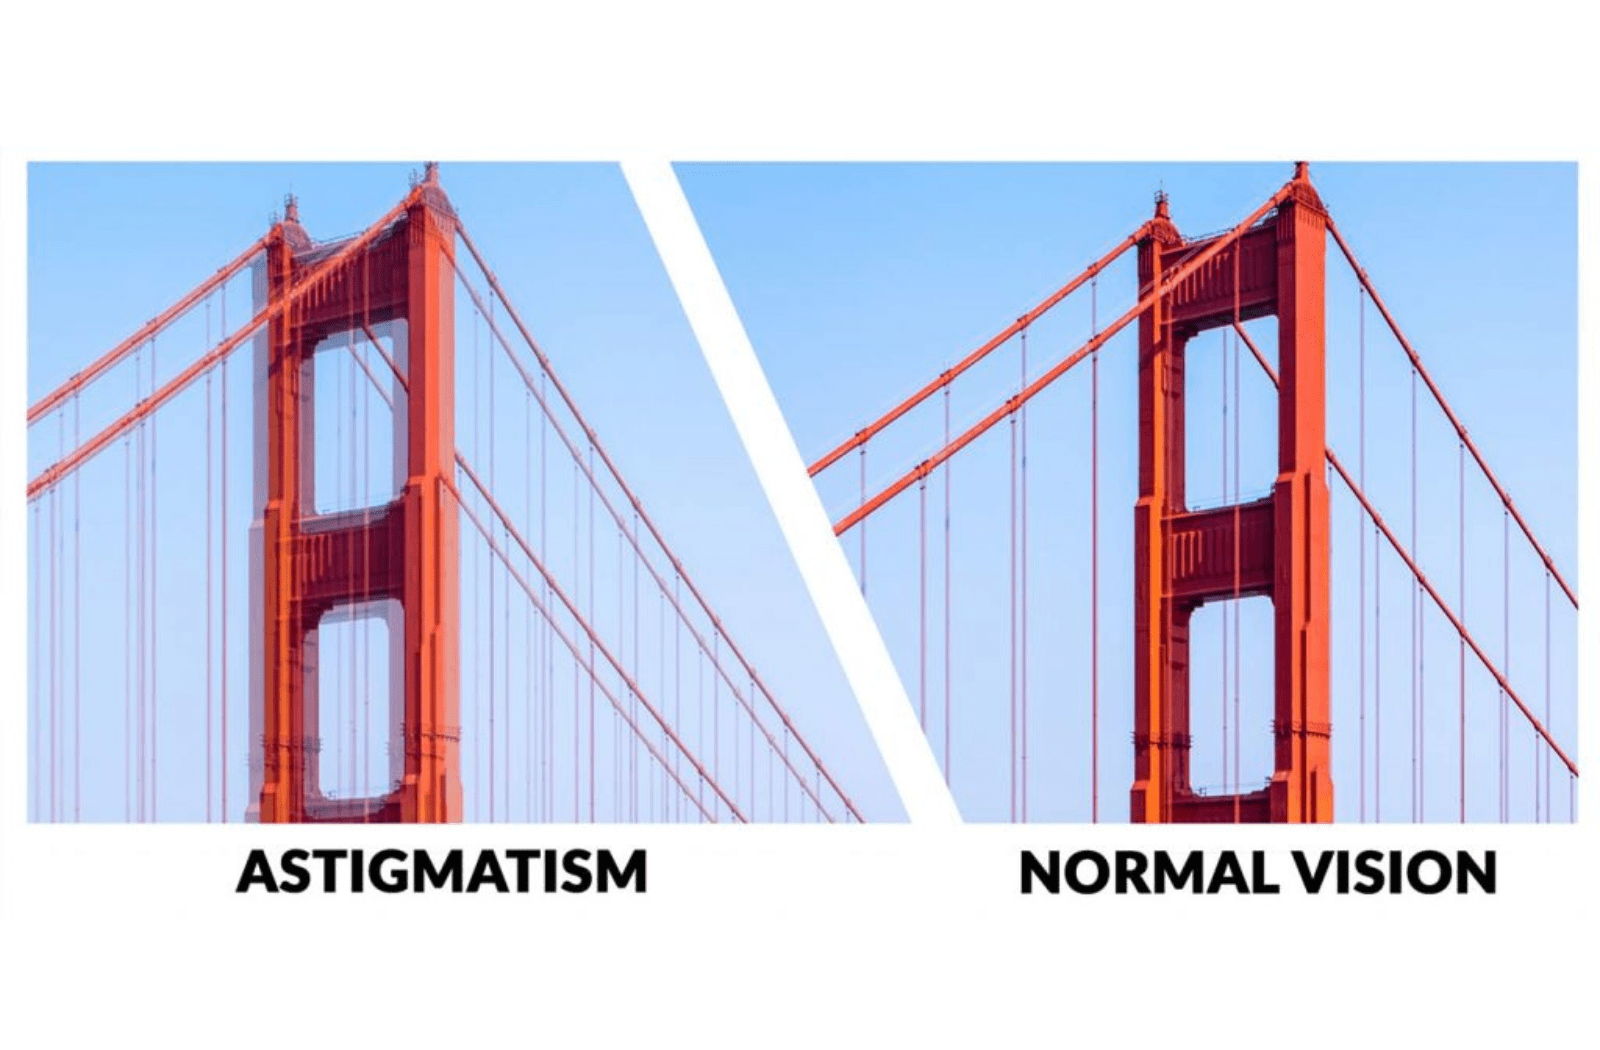 Two similar images comparing what a bridge would look like with normal vision and what the bridge would look like if the person had astigmatism